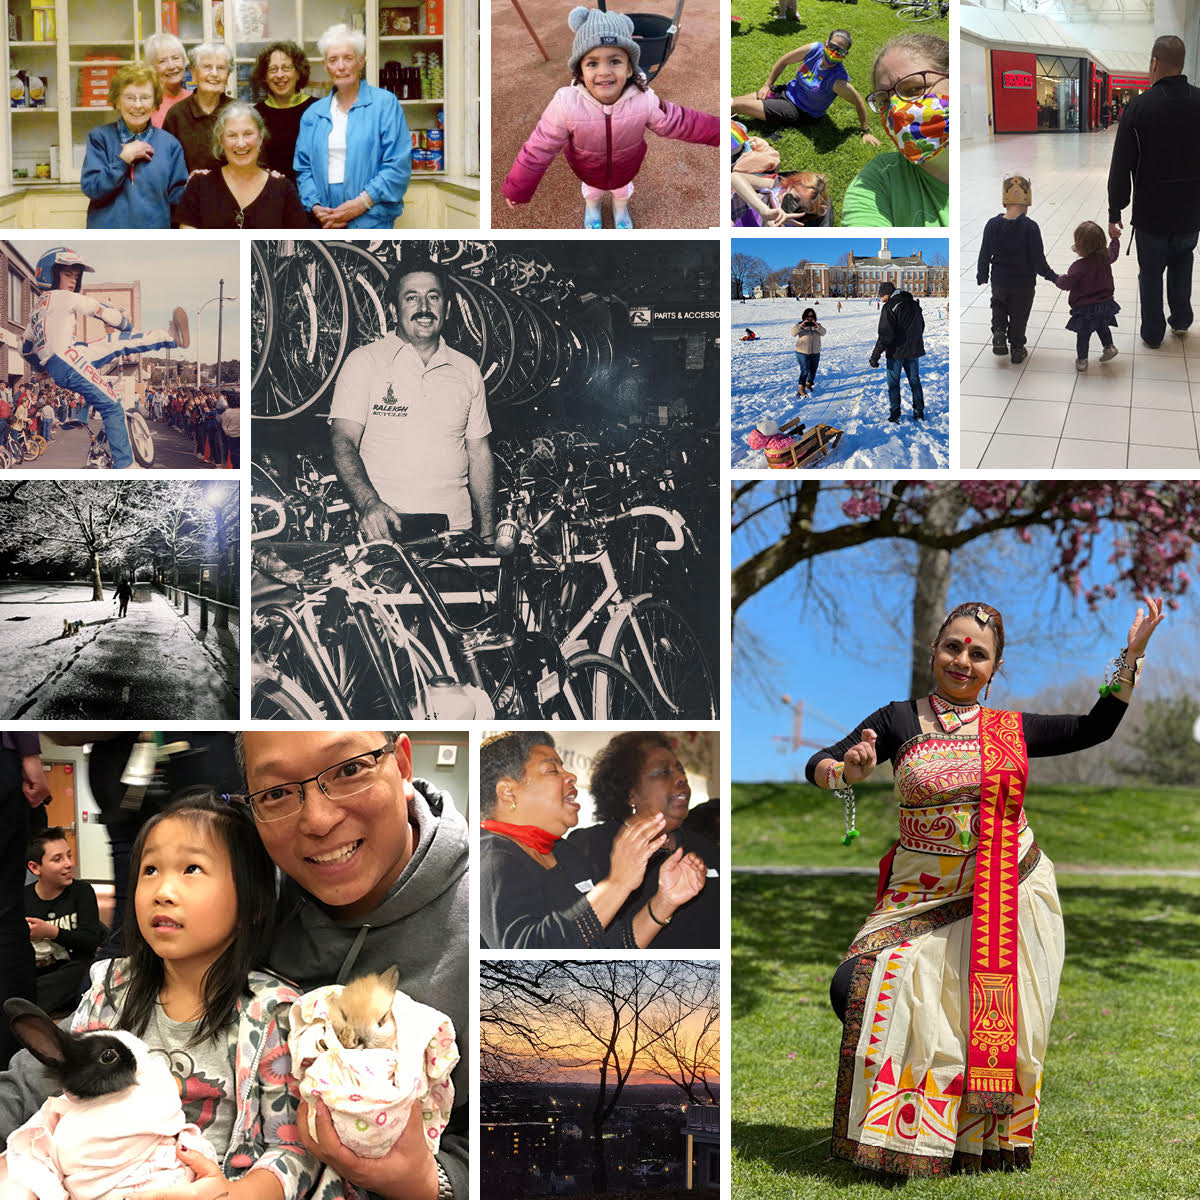 A collage of photos submitted by community members, depicting peope of a variety of ages and backgrounds. Some older photos are in black and white.